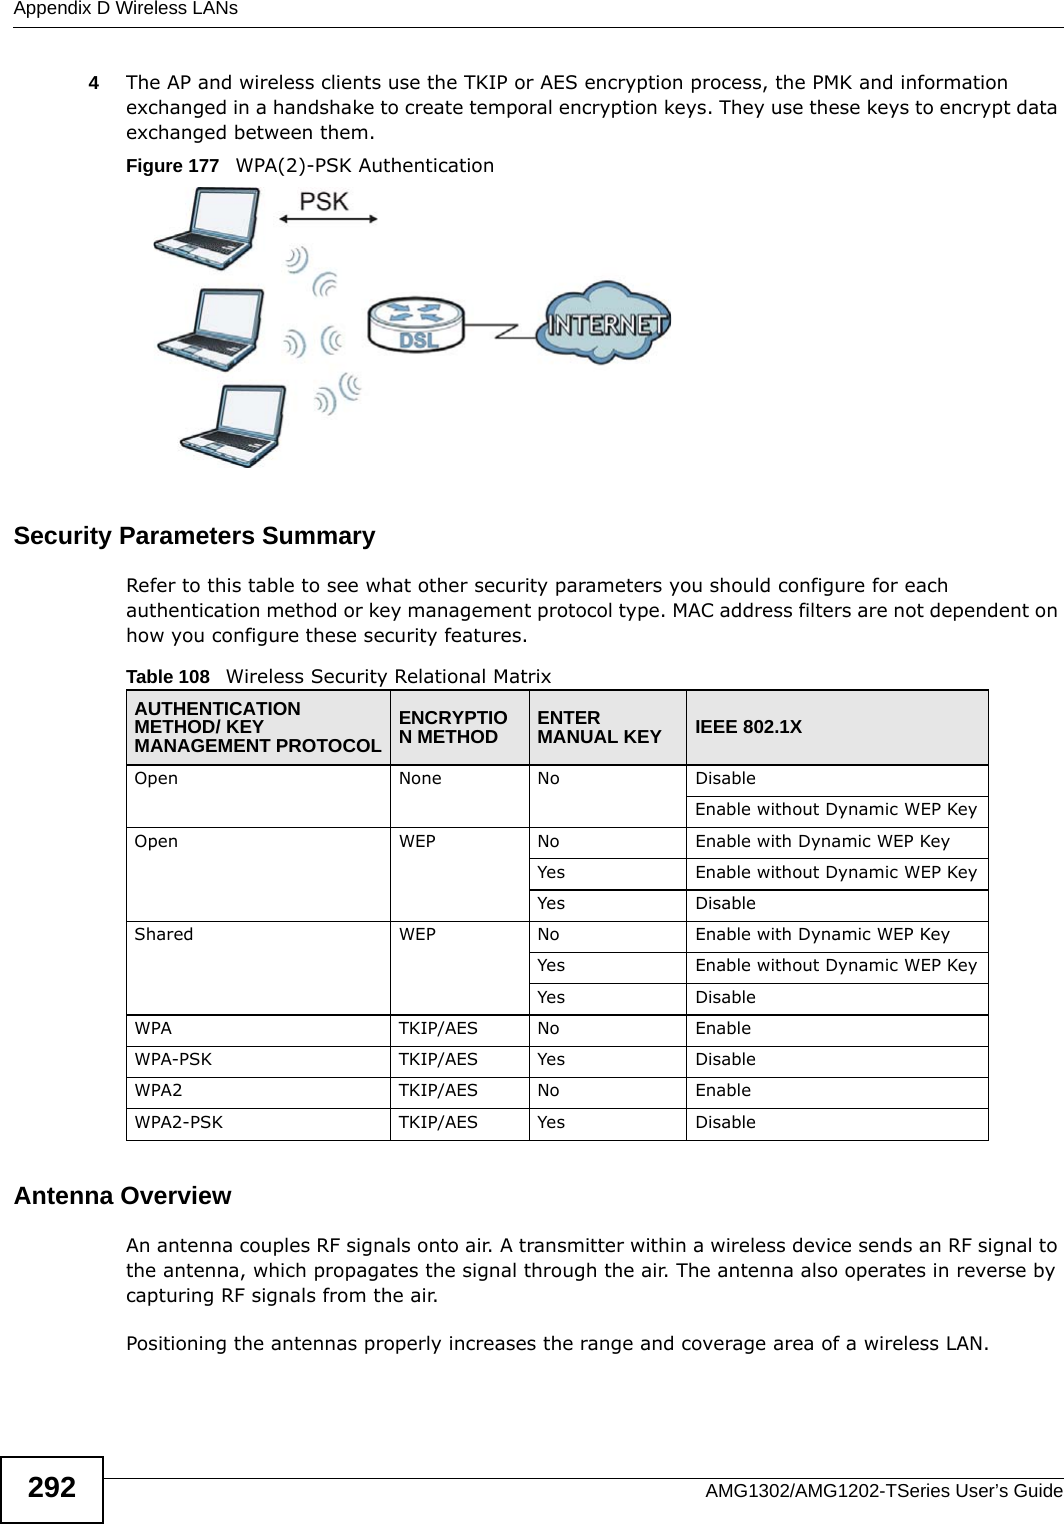 Appendix D Wireless LANsAMG1302/AMG1202-TSeries User’s Guide2924The AP and wireless clients use the TKIP or AES encryption process, the PMK and information exchanged in a handshake to create temporal encryption keys. They use these keys to encrypt data exchanged between them.Figure 177   WPA(2)-PSK AuthenticationSecurity Parameters SummaryRefer to this table to see what other security parameters you should configure for each authentication method or key management protocol type. MAC address filters are not dependent on how you configure these security features.Antenna OverviewAn antenna couples RF signals onto air. A transmitter within a wireless device sends an RF signal to the antenna, which propagates the signal through the air. The antenna also operates in reverse by capturing RF signals from the air. Positioning the antennas properly increases the range and coverage area of a wireless LAN. Table 108   Wireless Security Relational MatrixAUTHENTICATION METHOD/ KEY MANAGEMENT PROTOCOLENCRYPTION METHOD ENTER MANUAL KEY IEEE 802.1XOpen None No DisableEnable without Dynamic WEP KeyOpen WEP No           Enable with Dynamic WEP KeyYes Enable without Dynamic WEP KeyYes DisableShared WEP  No           Enable with Dynamic WEP KeyYes Enable without Dynamic WEP KeyYes DisableWPA  TKIP/AES No EnableWPA-PSK  TKIP/AES Yes DisableWPA2 TKIP/AES No EnableWPA2-PSK  TKIP/AES Yes Disable